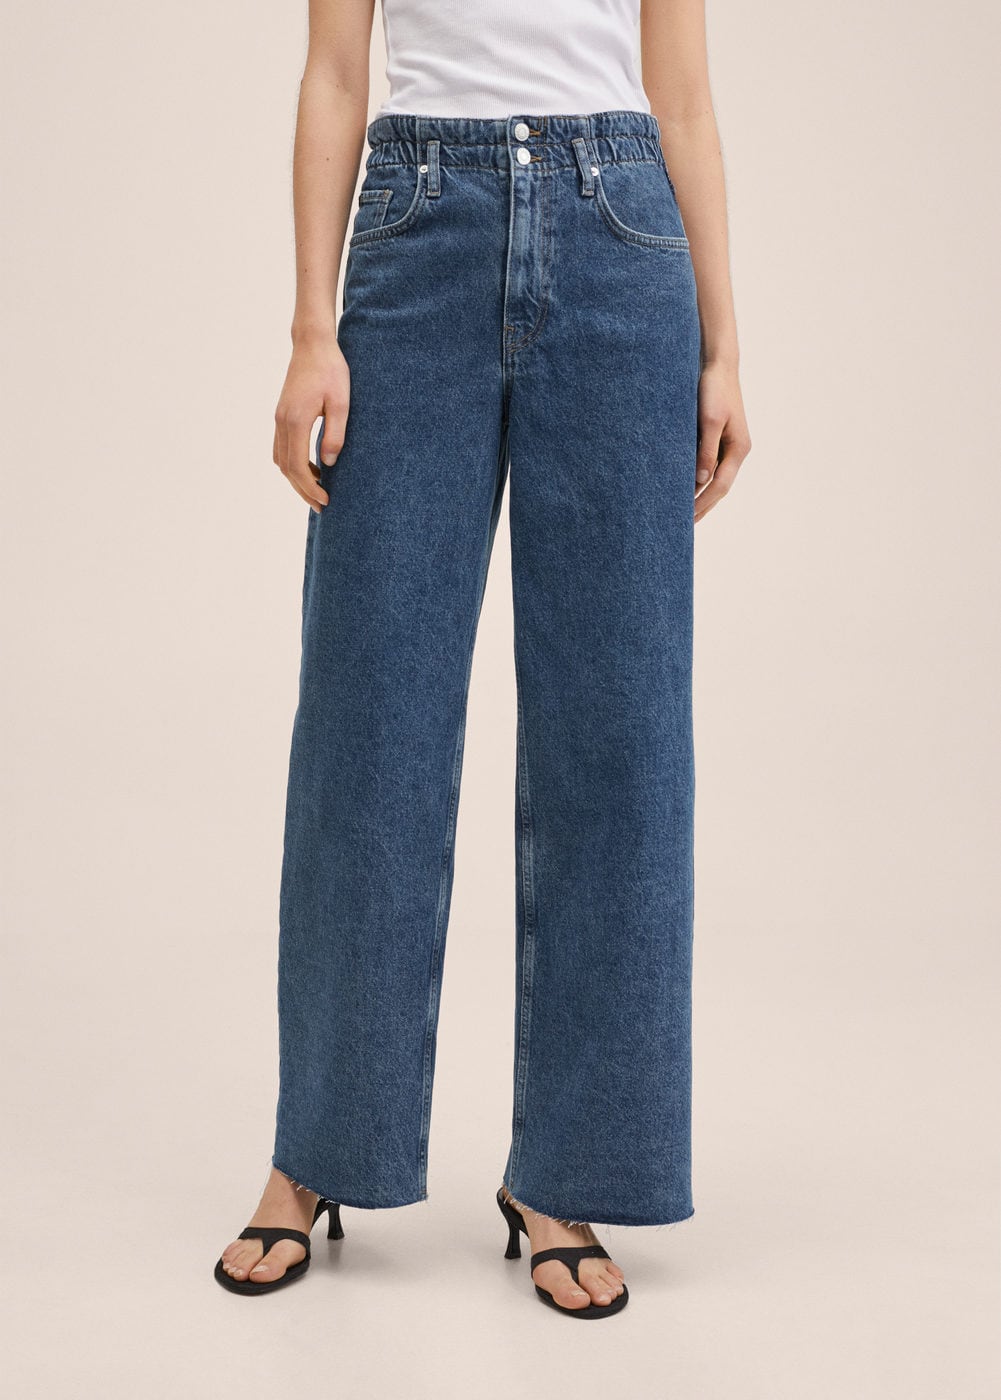 The 30 Best Cheap High-Waisted Jeans for Women | Who What Wear